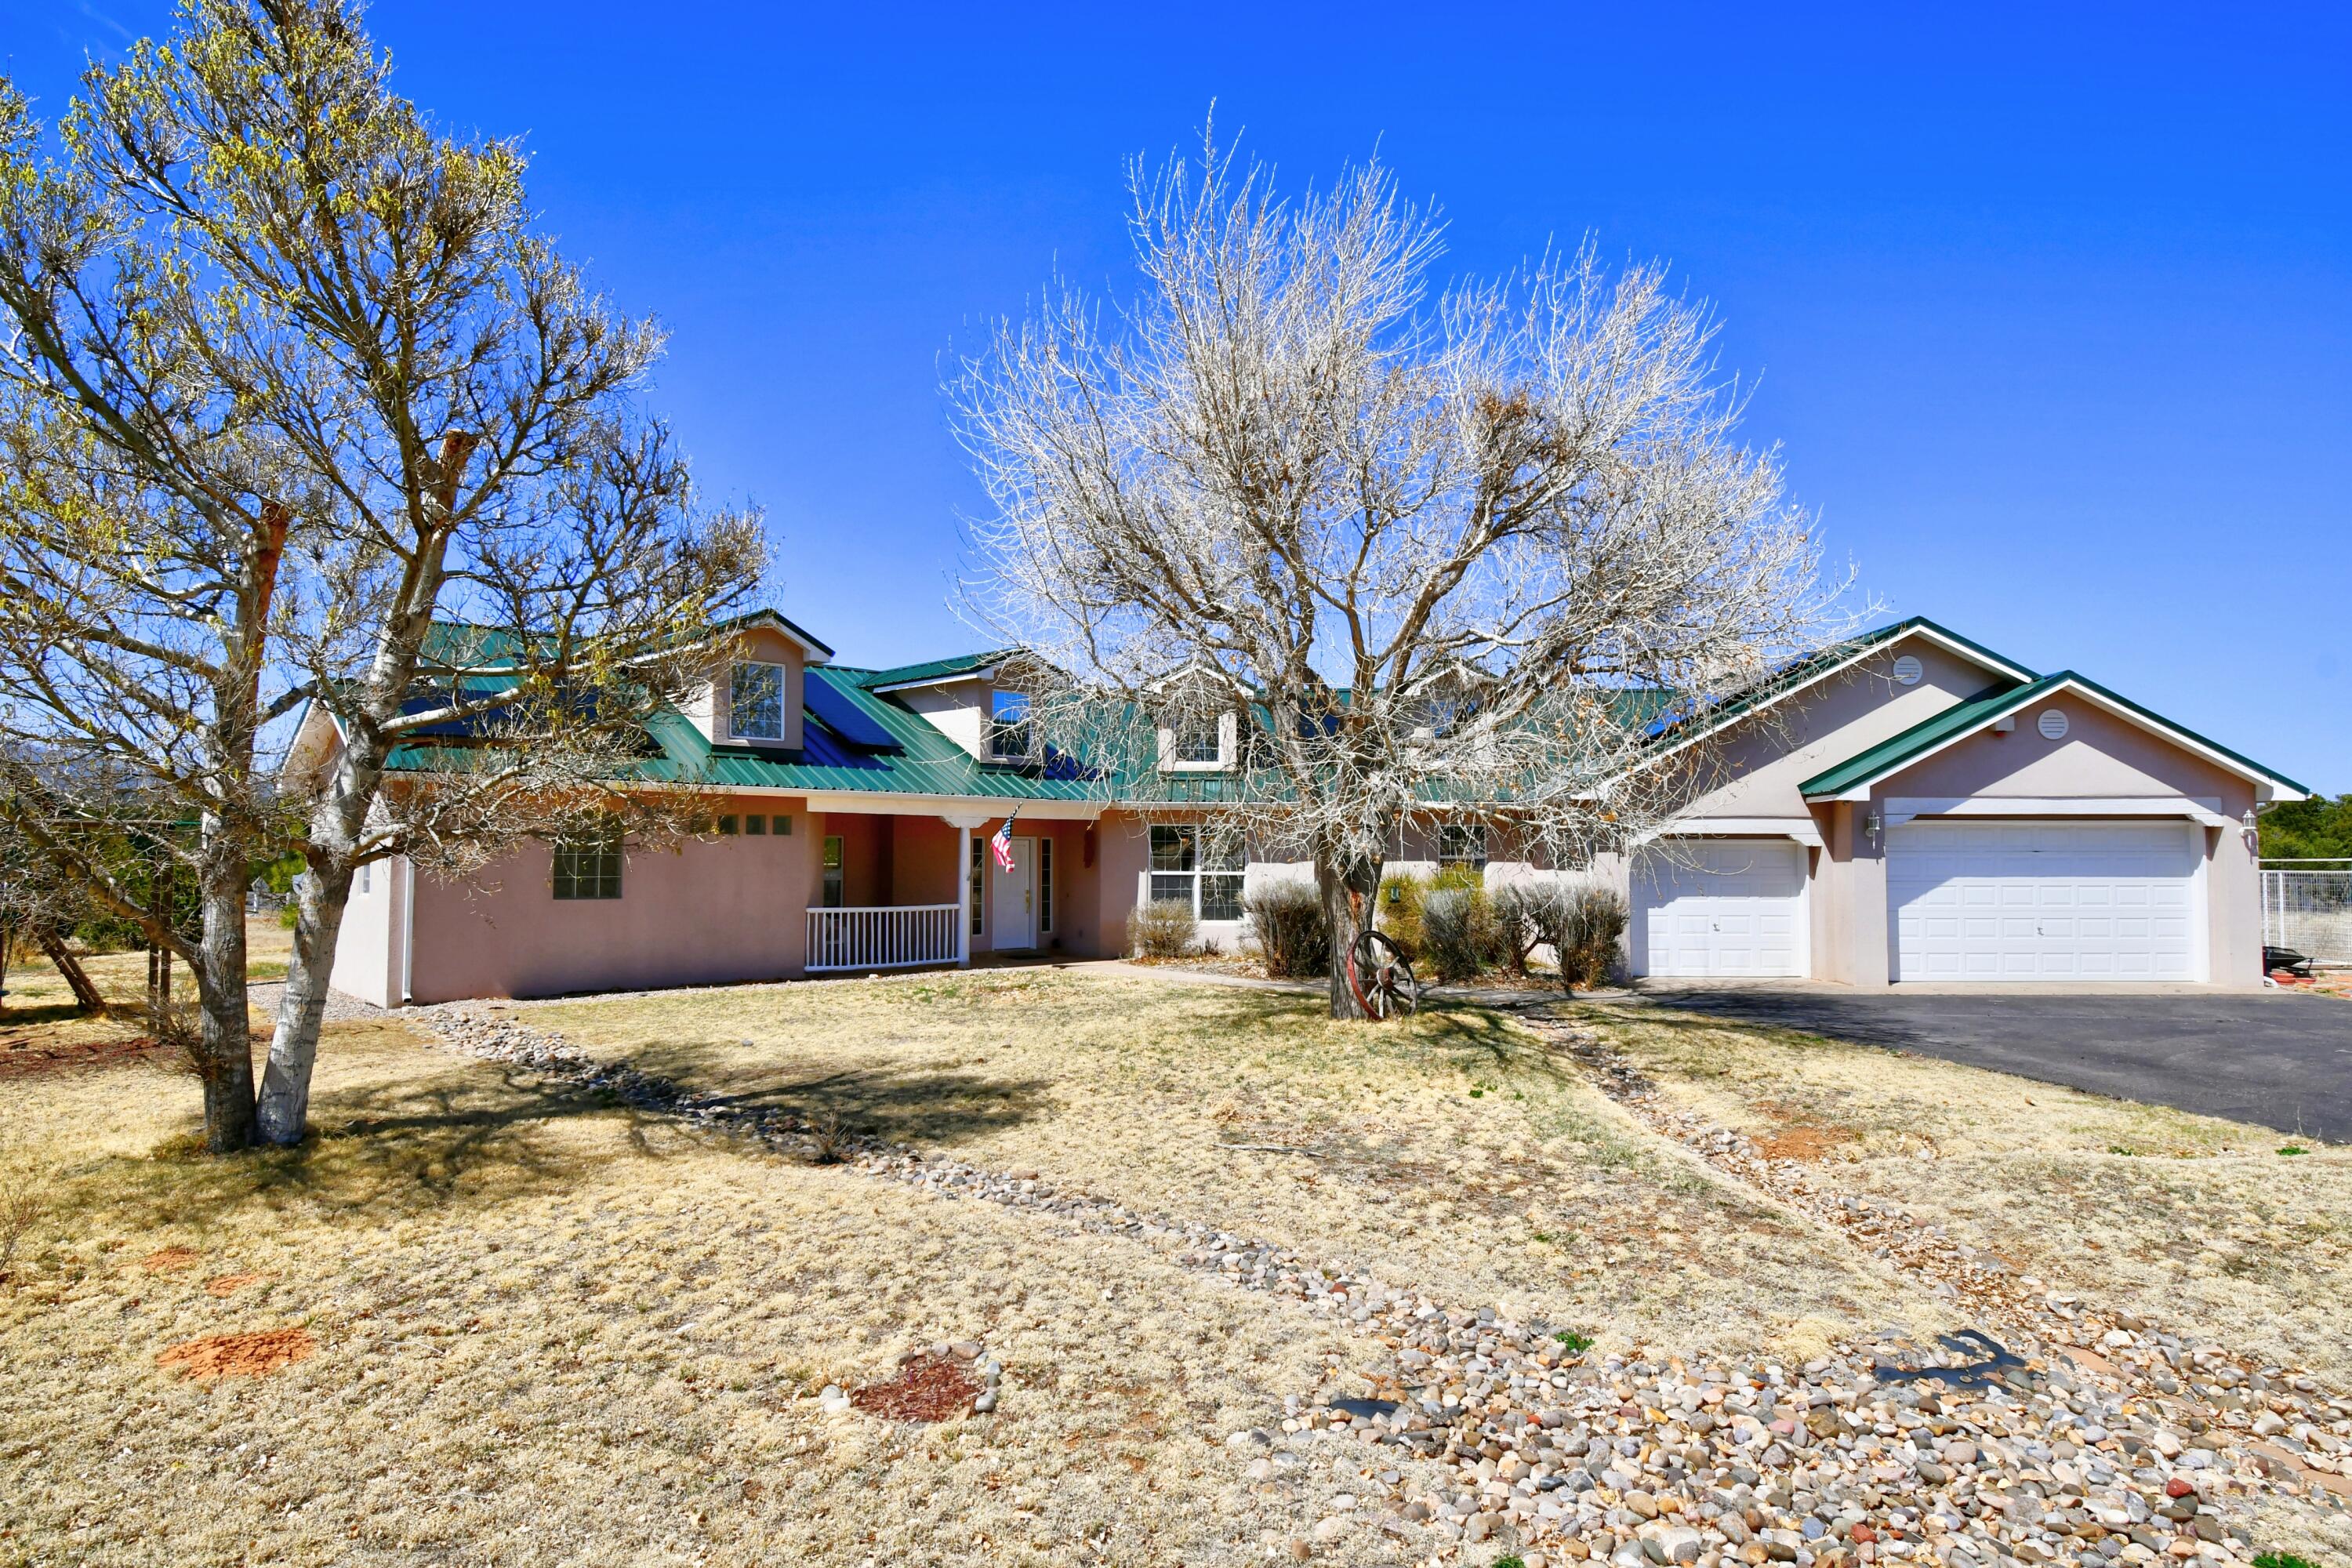 Stunning single level home with fully owned solar system on 3 acres in the desirable Richland Estates neighborhood!   Open floorplan that leads out to a private backyard area with covered patio, plenty of space for entertaining and VIEWS of the Sandia Mountains. Large kitchen with custom Halbert cabinets and island open to the dining room. Split floorplan and spacious master suite with fireplace, jetted tub and large walk in closet and separate shower. 3 bedrooms, plus an office or 4th bedroom with glass french doors and kiva fireplace. Recent updates include newer Metal roof(2020), owned solar system with amazing East Mountain perks including community water, No HOA and 3 car garage.